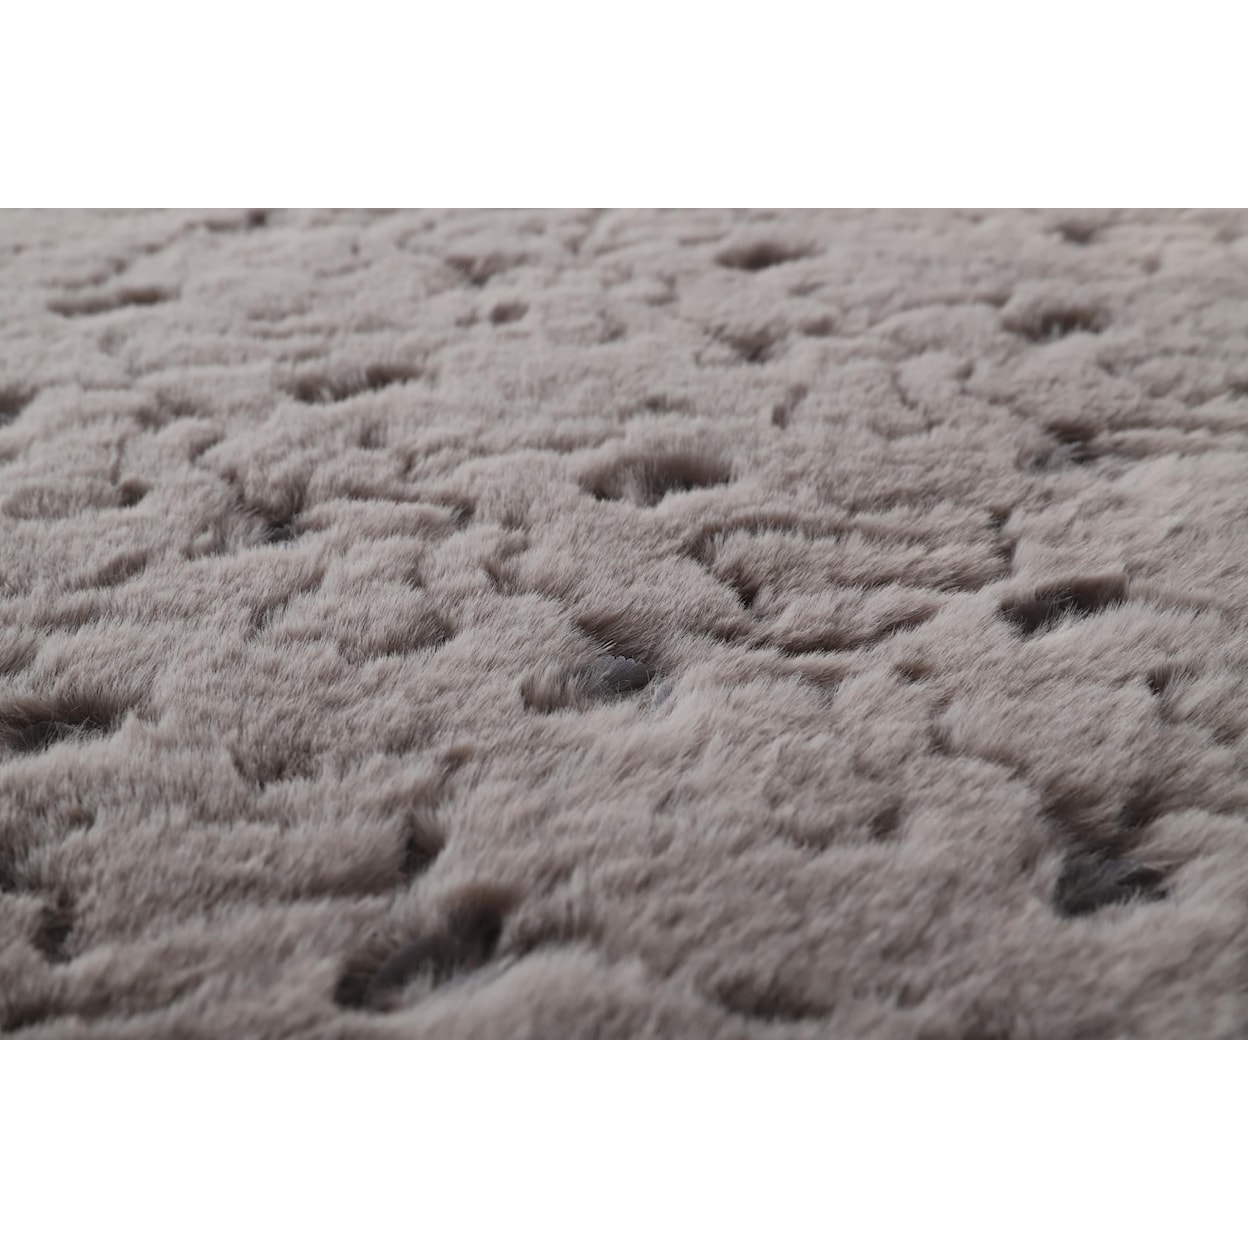 MDA Rugs Amore Collection AMORE 5X7 PATTERN GREY AREA RUG |